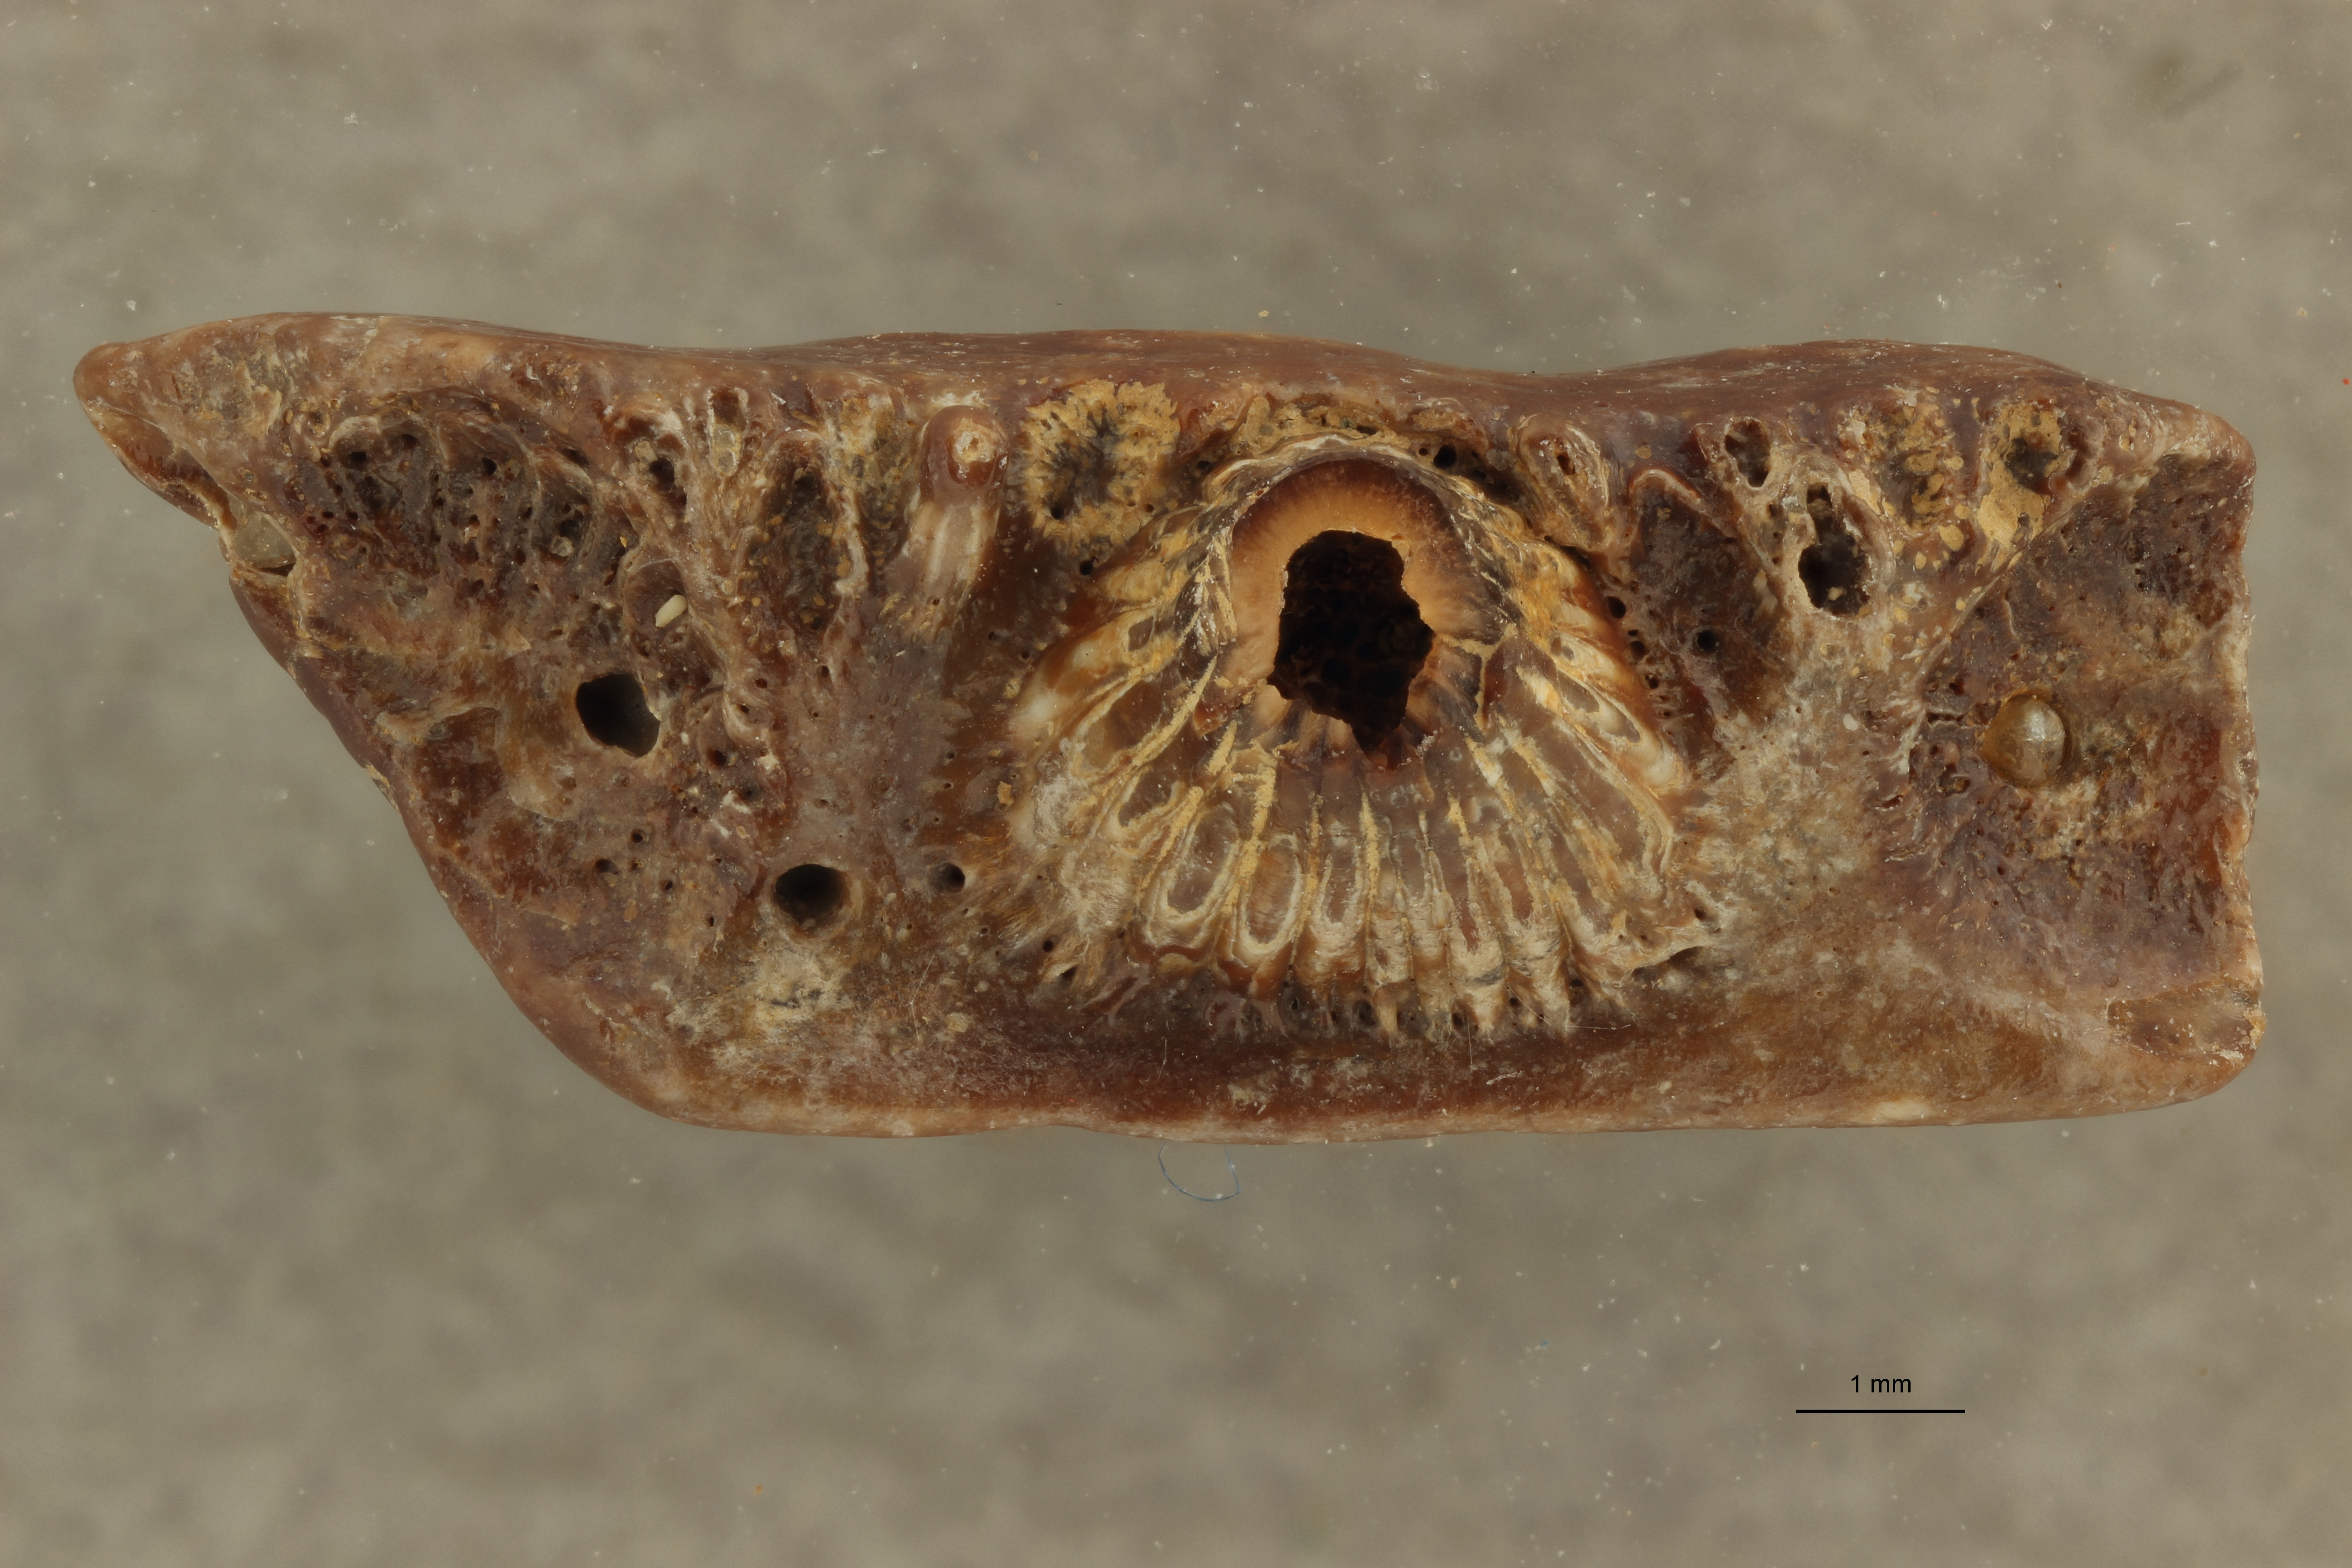 Lepidosteus suessionensis (Photostacking) - Occlusal View